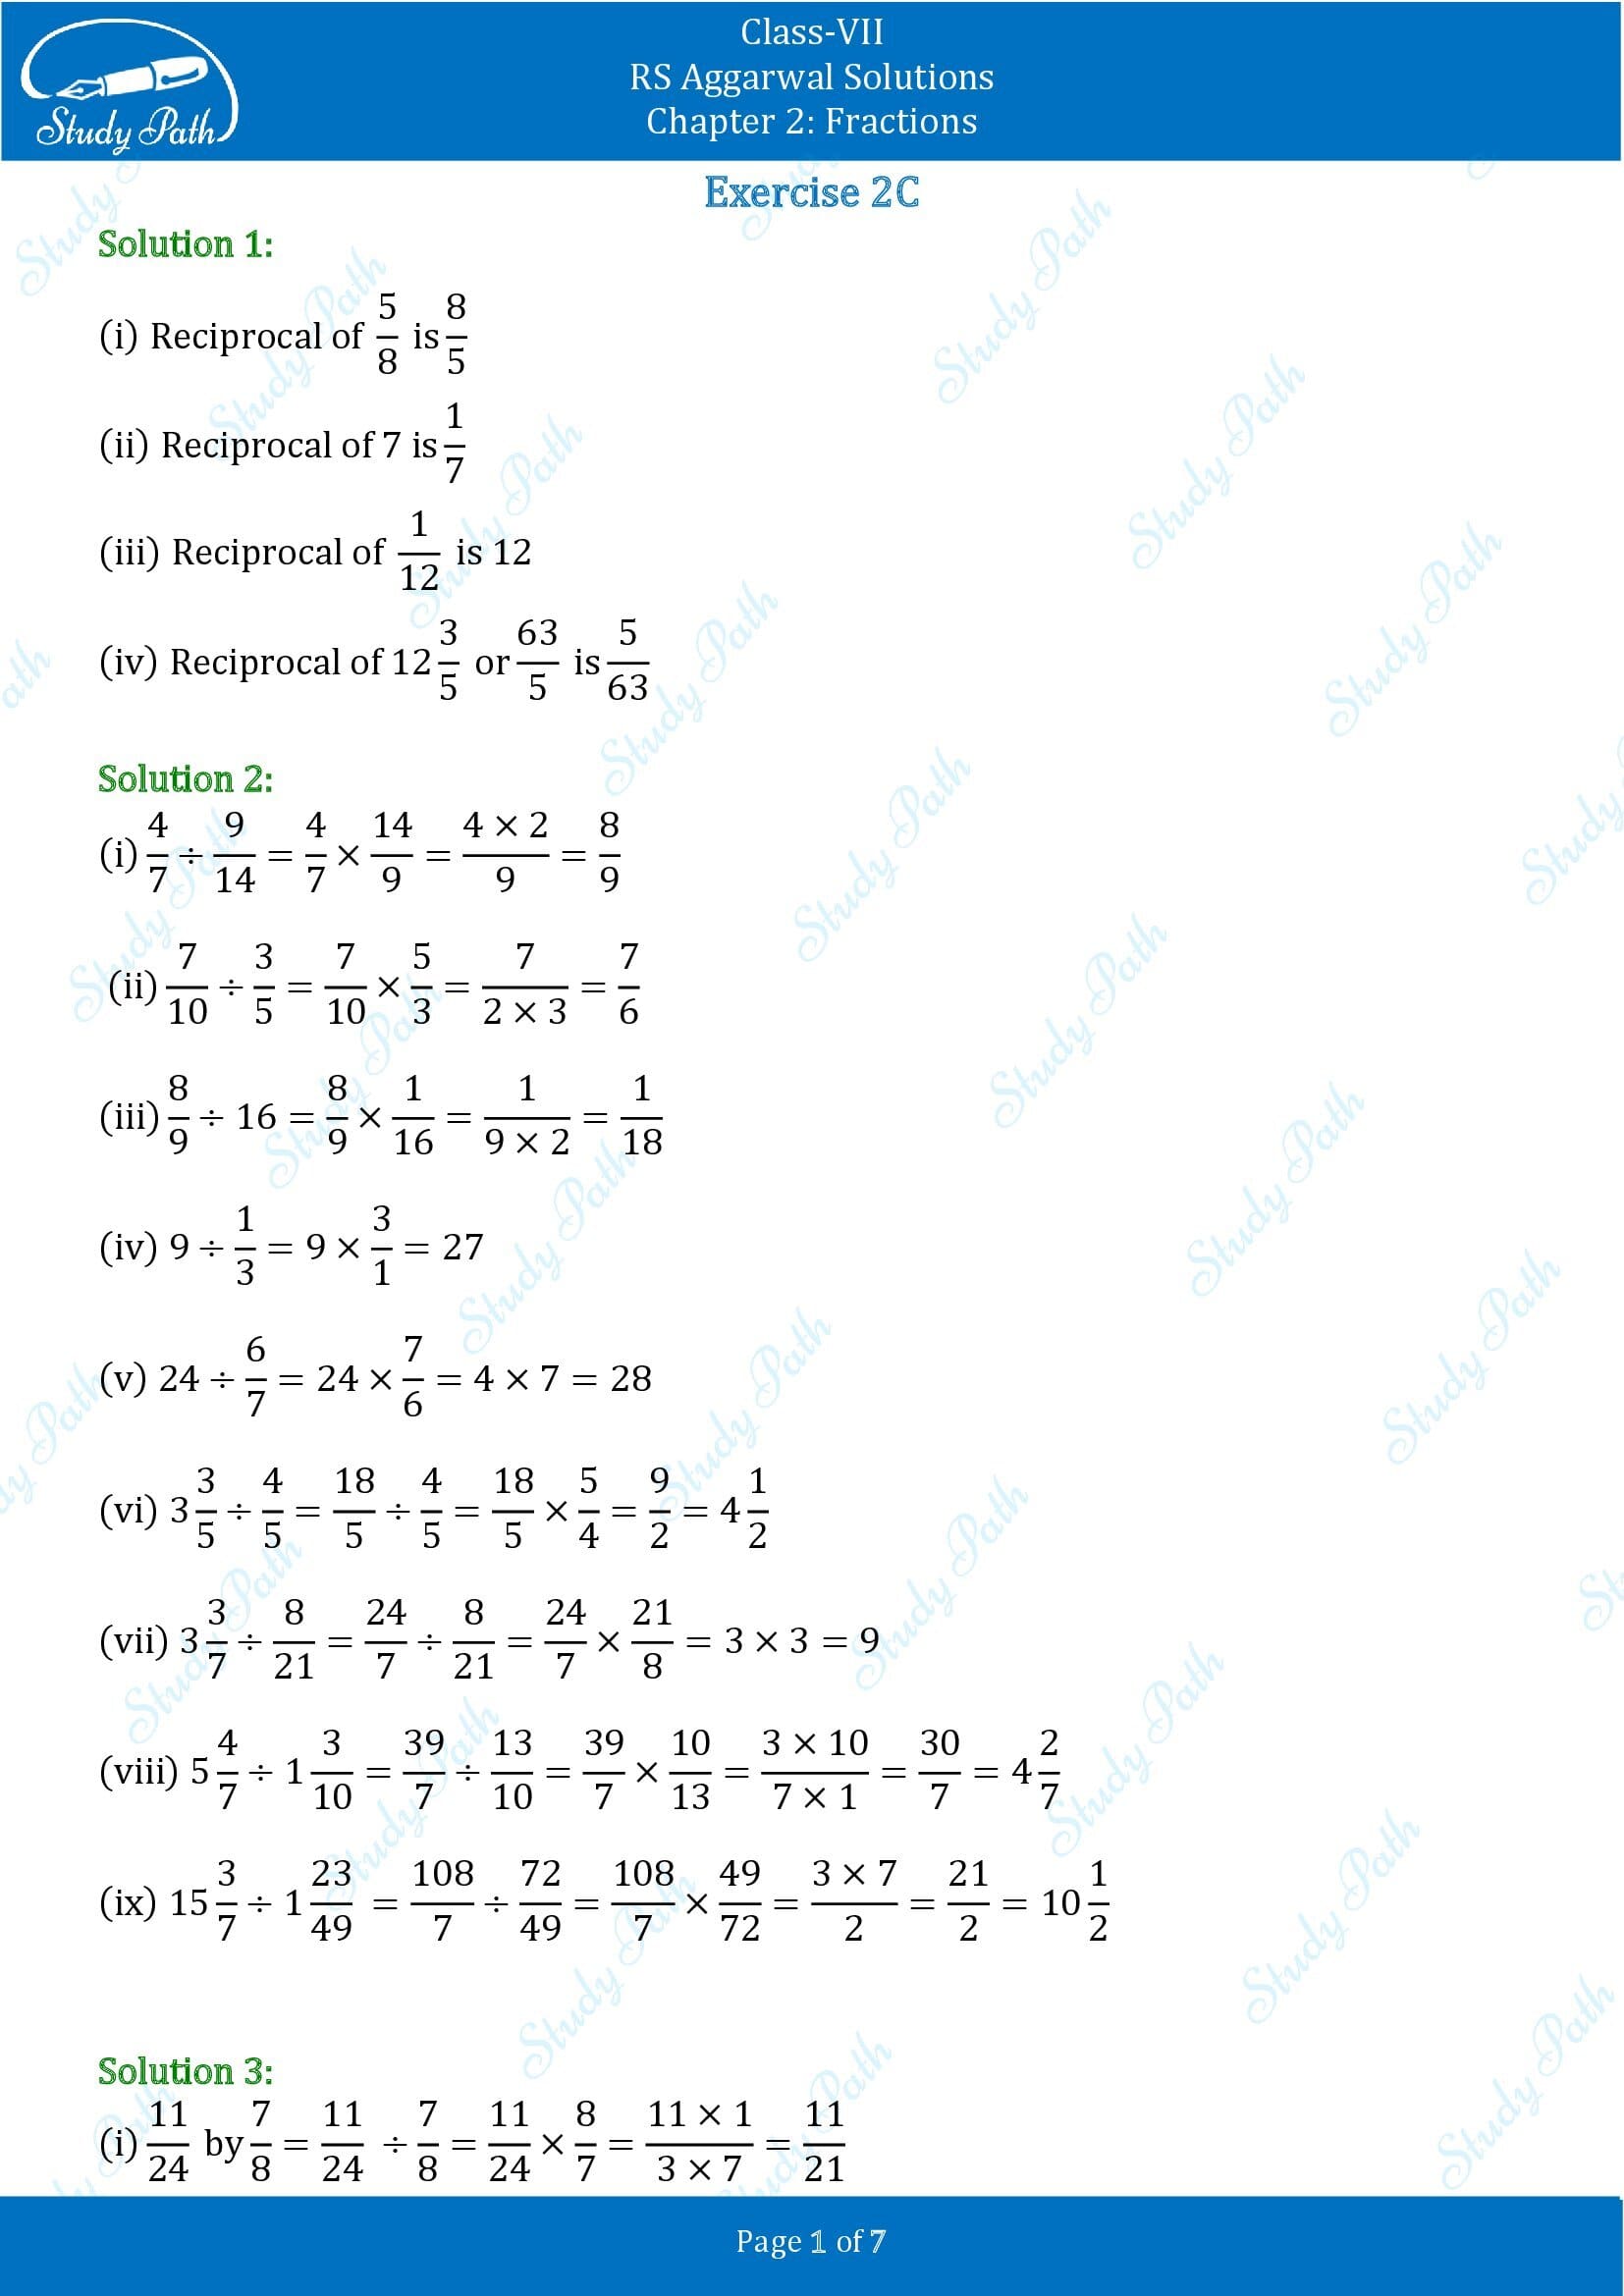 RS Aggarwal Solutions Class 7 Chapter 2 Fractions Exercise 2C 00001